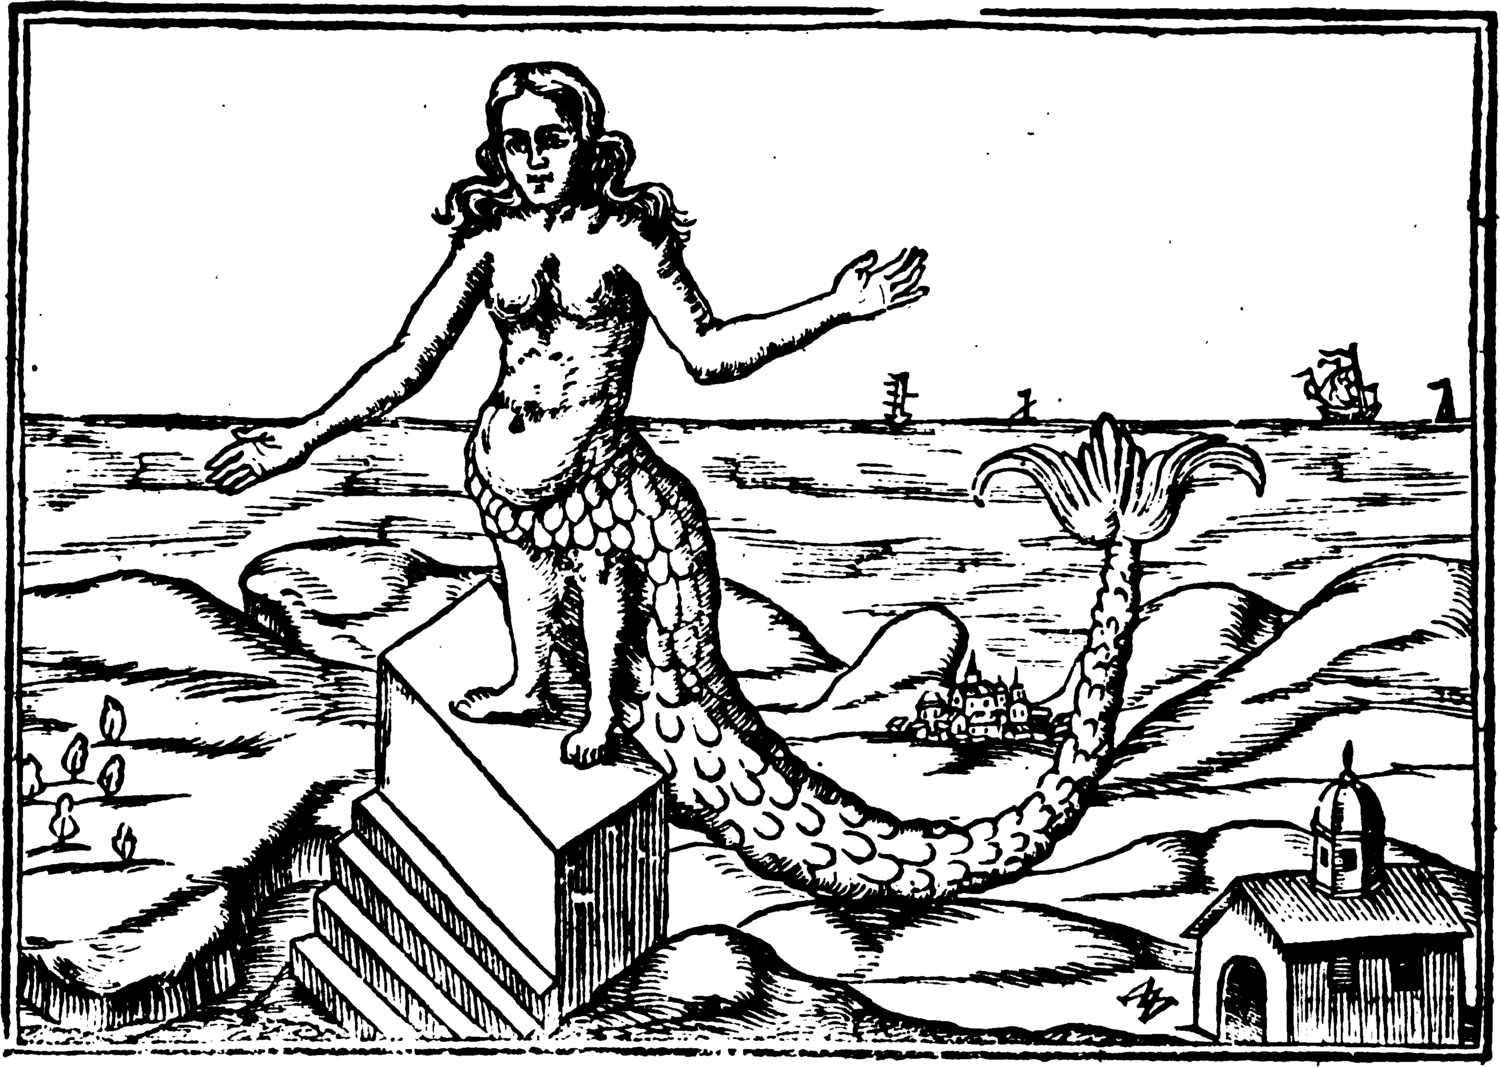 The goddess in her Atar-gatis guise has legs as well as a long fish tail.